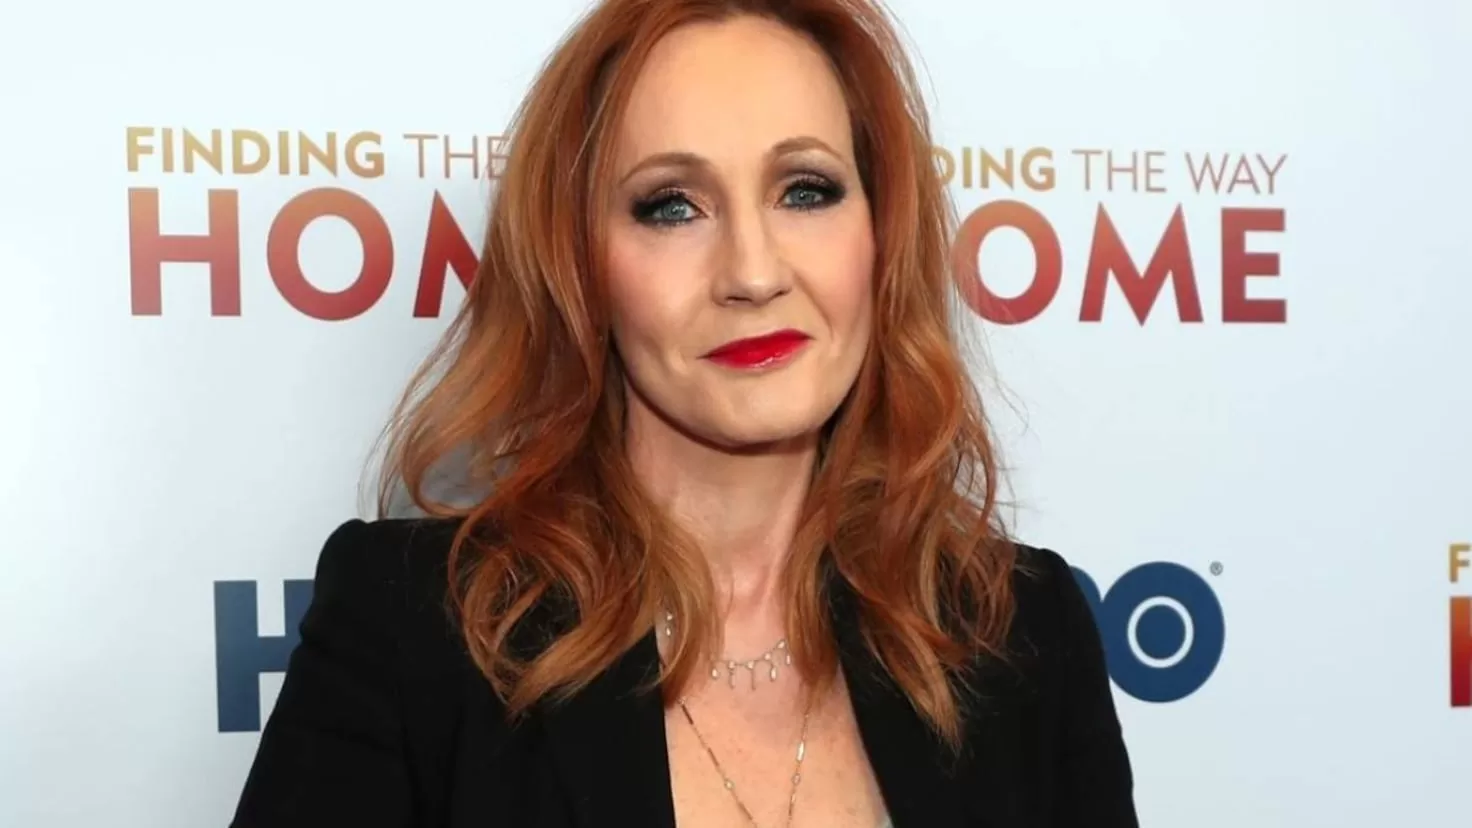 JK Rowling's controversial messages on the occasion of Mother's Day
